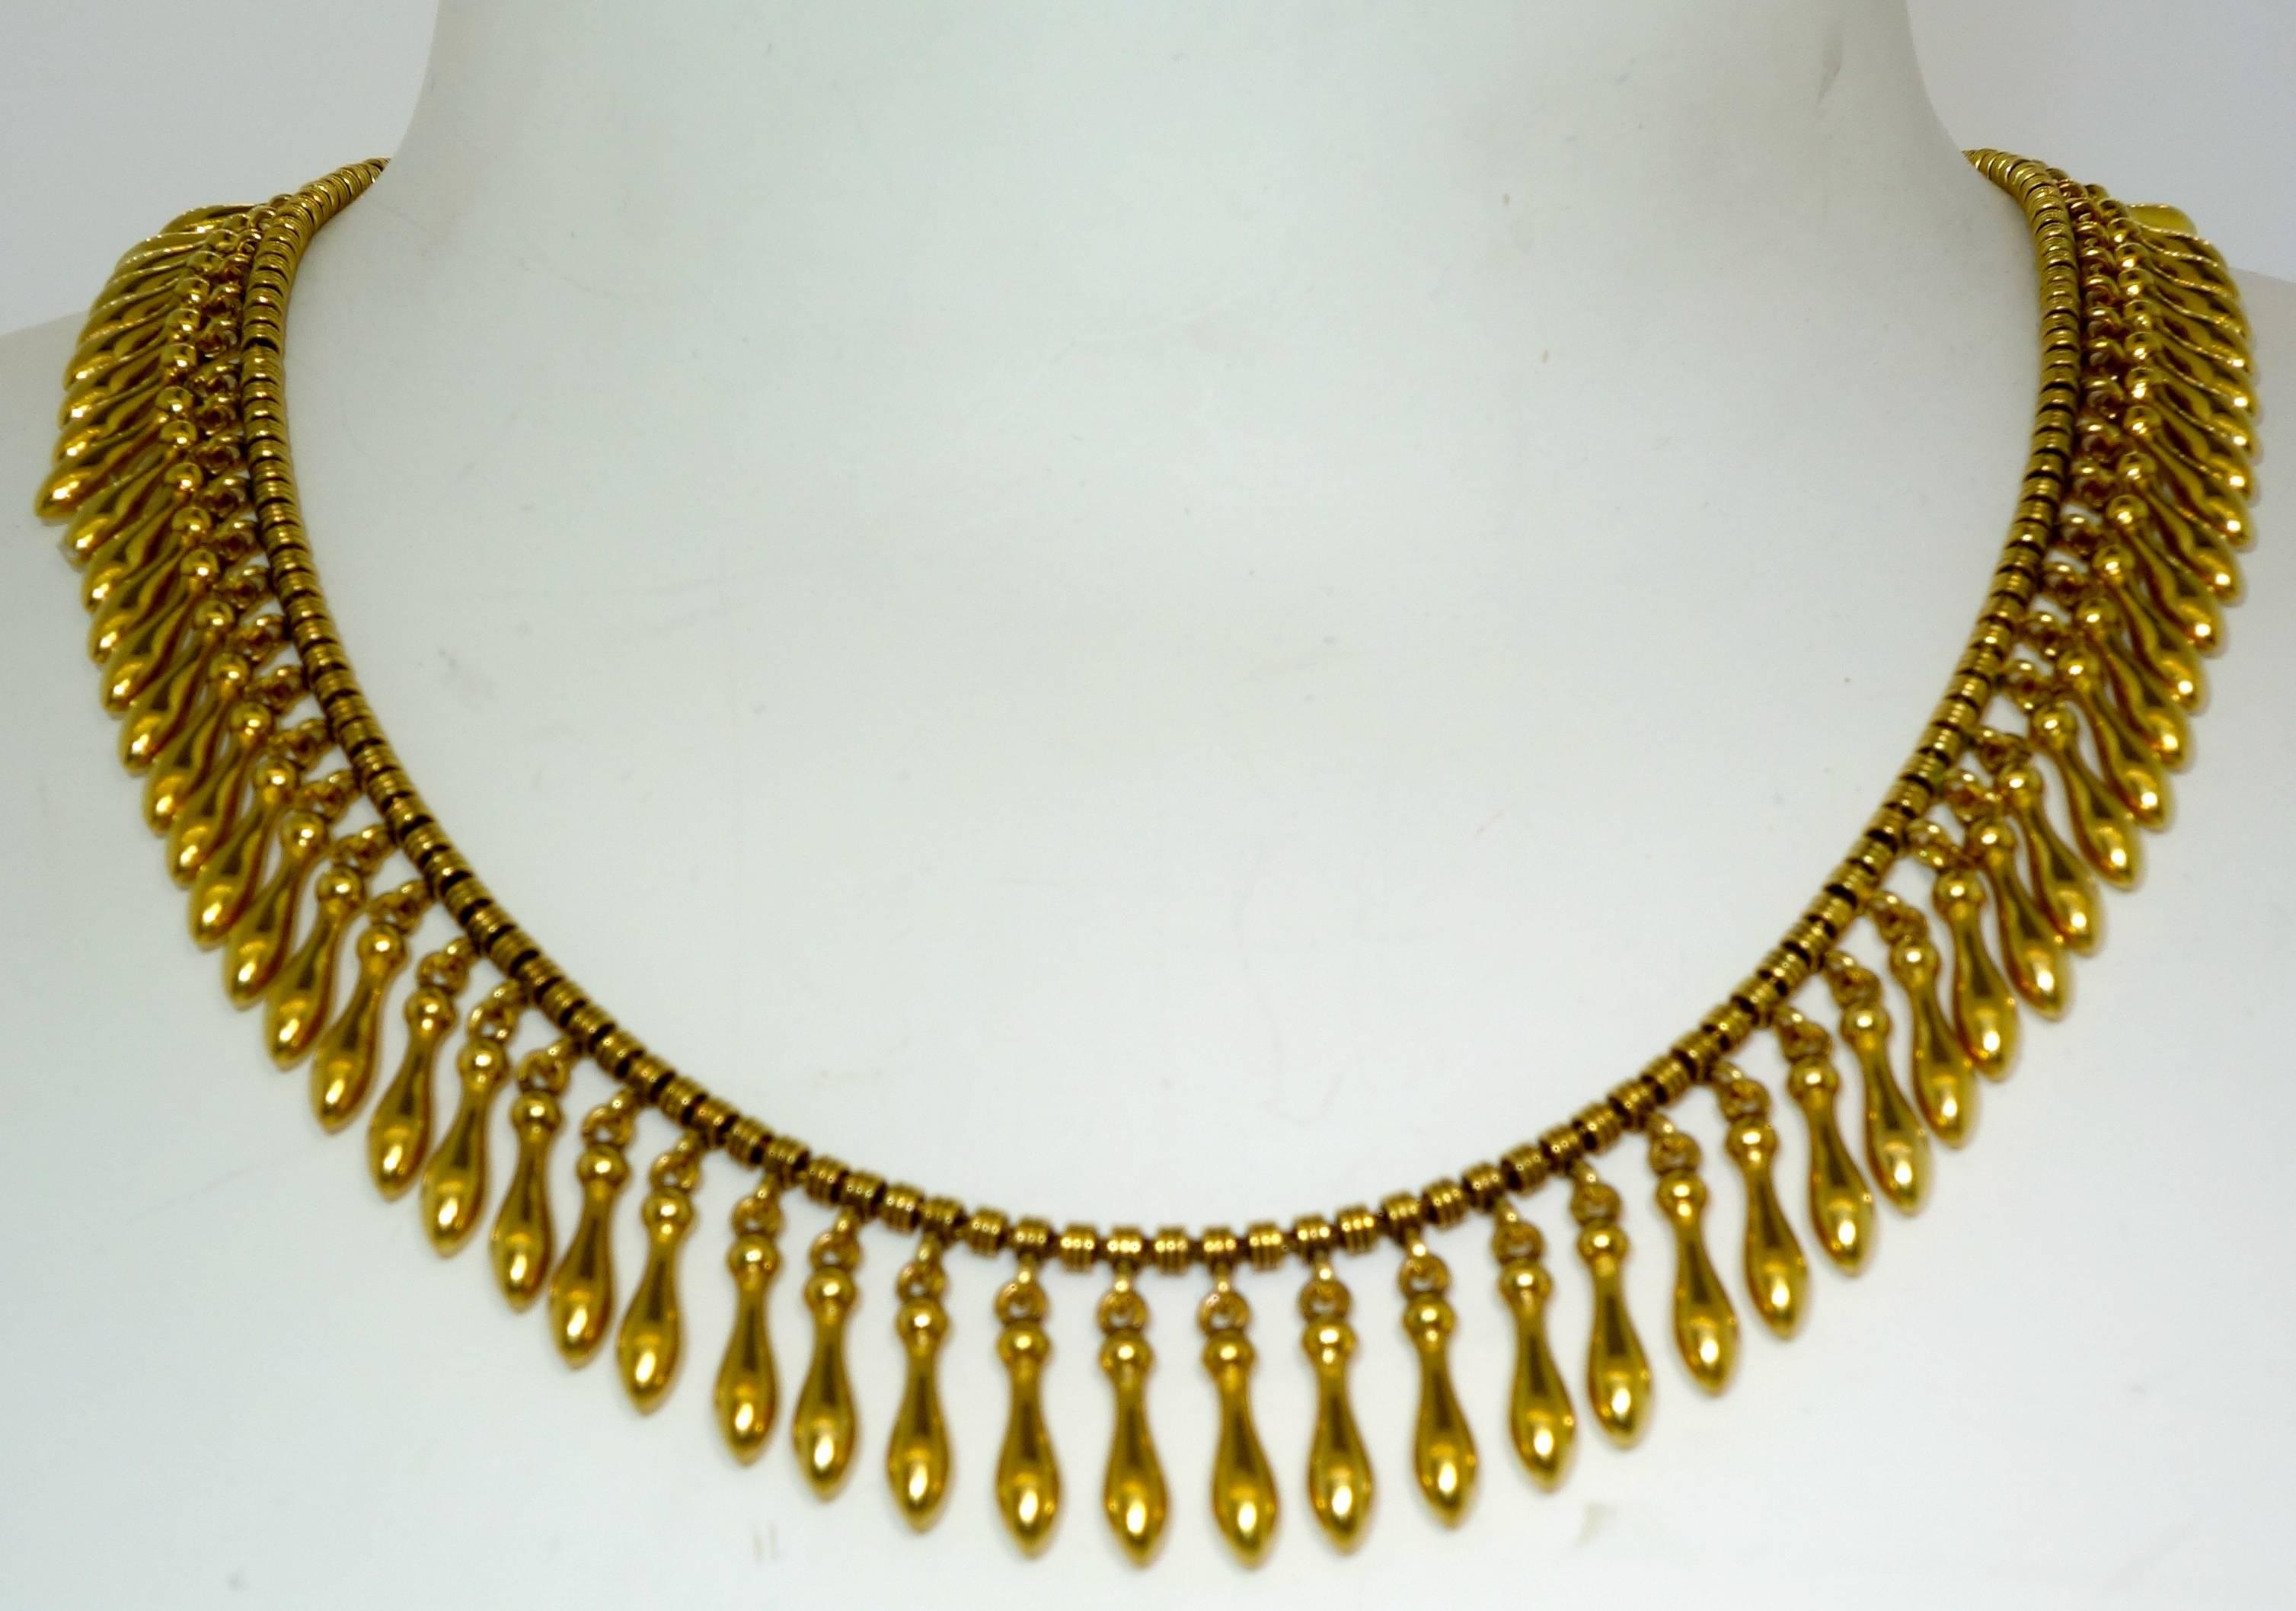 18K gold classic late 19th century necklace.  14 inches in length, worn at the neckline.  This piece is easy to wear and very distinctive.  Notice how well this solid but delicate necklace has been made - the workmanship is very fine, it terminates